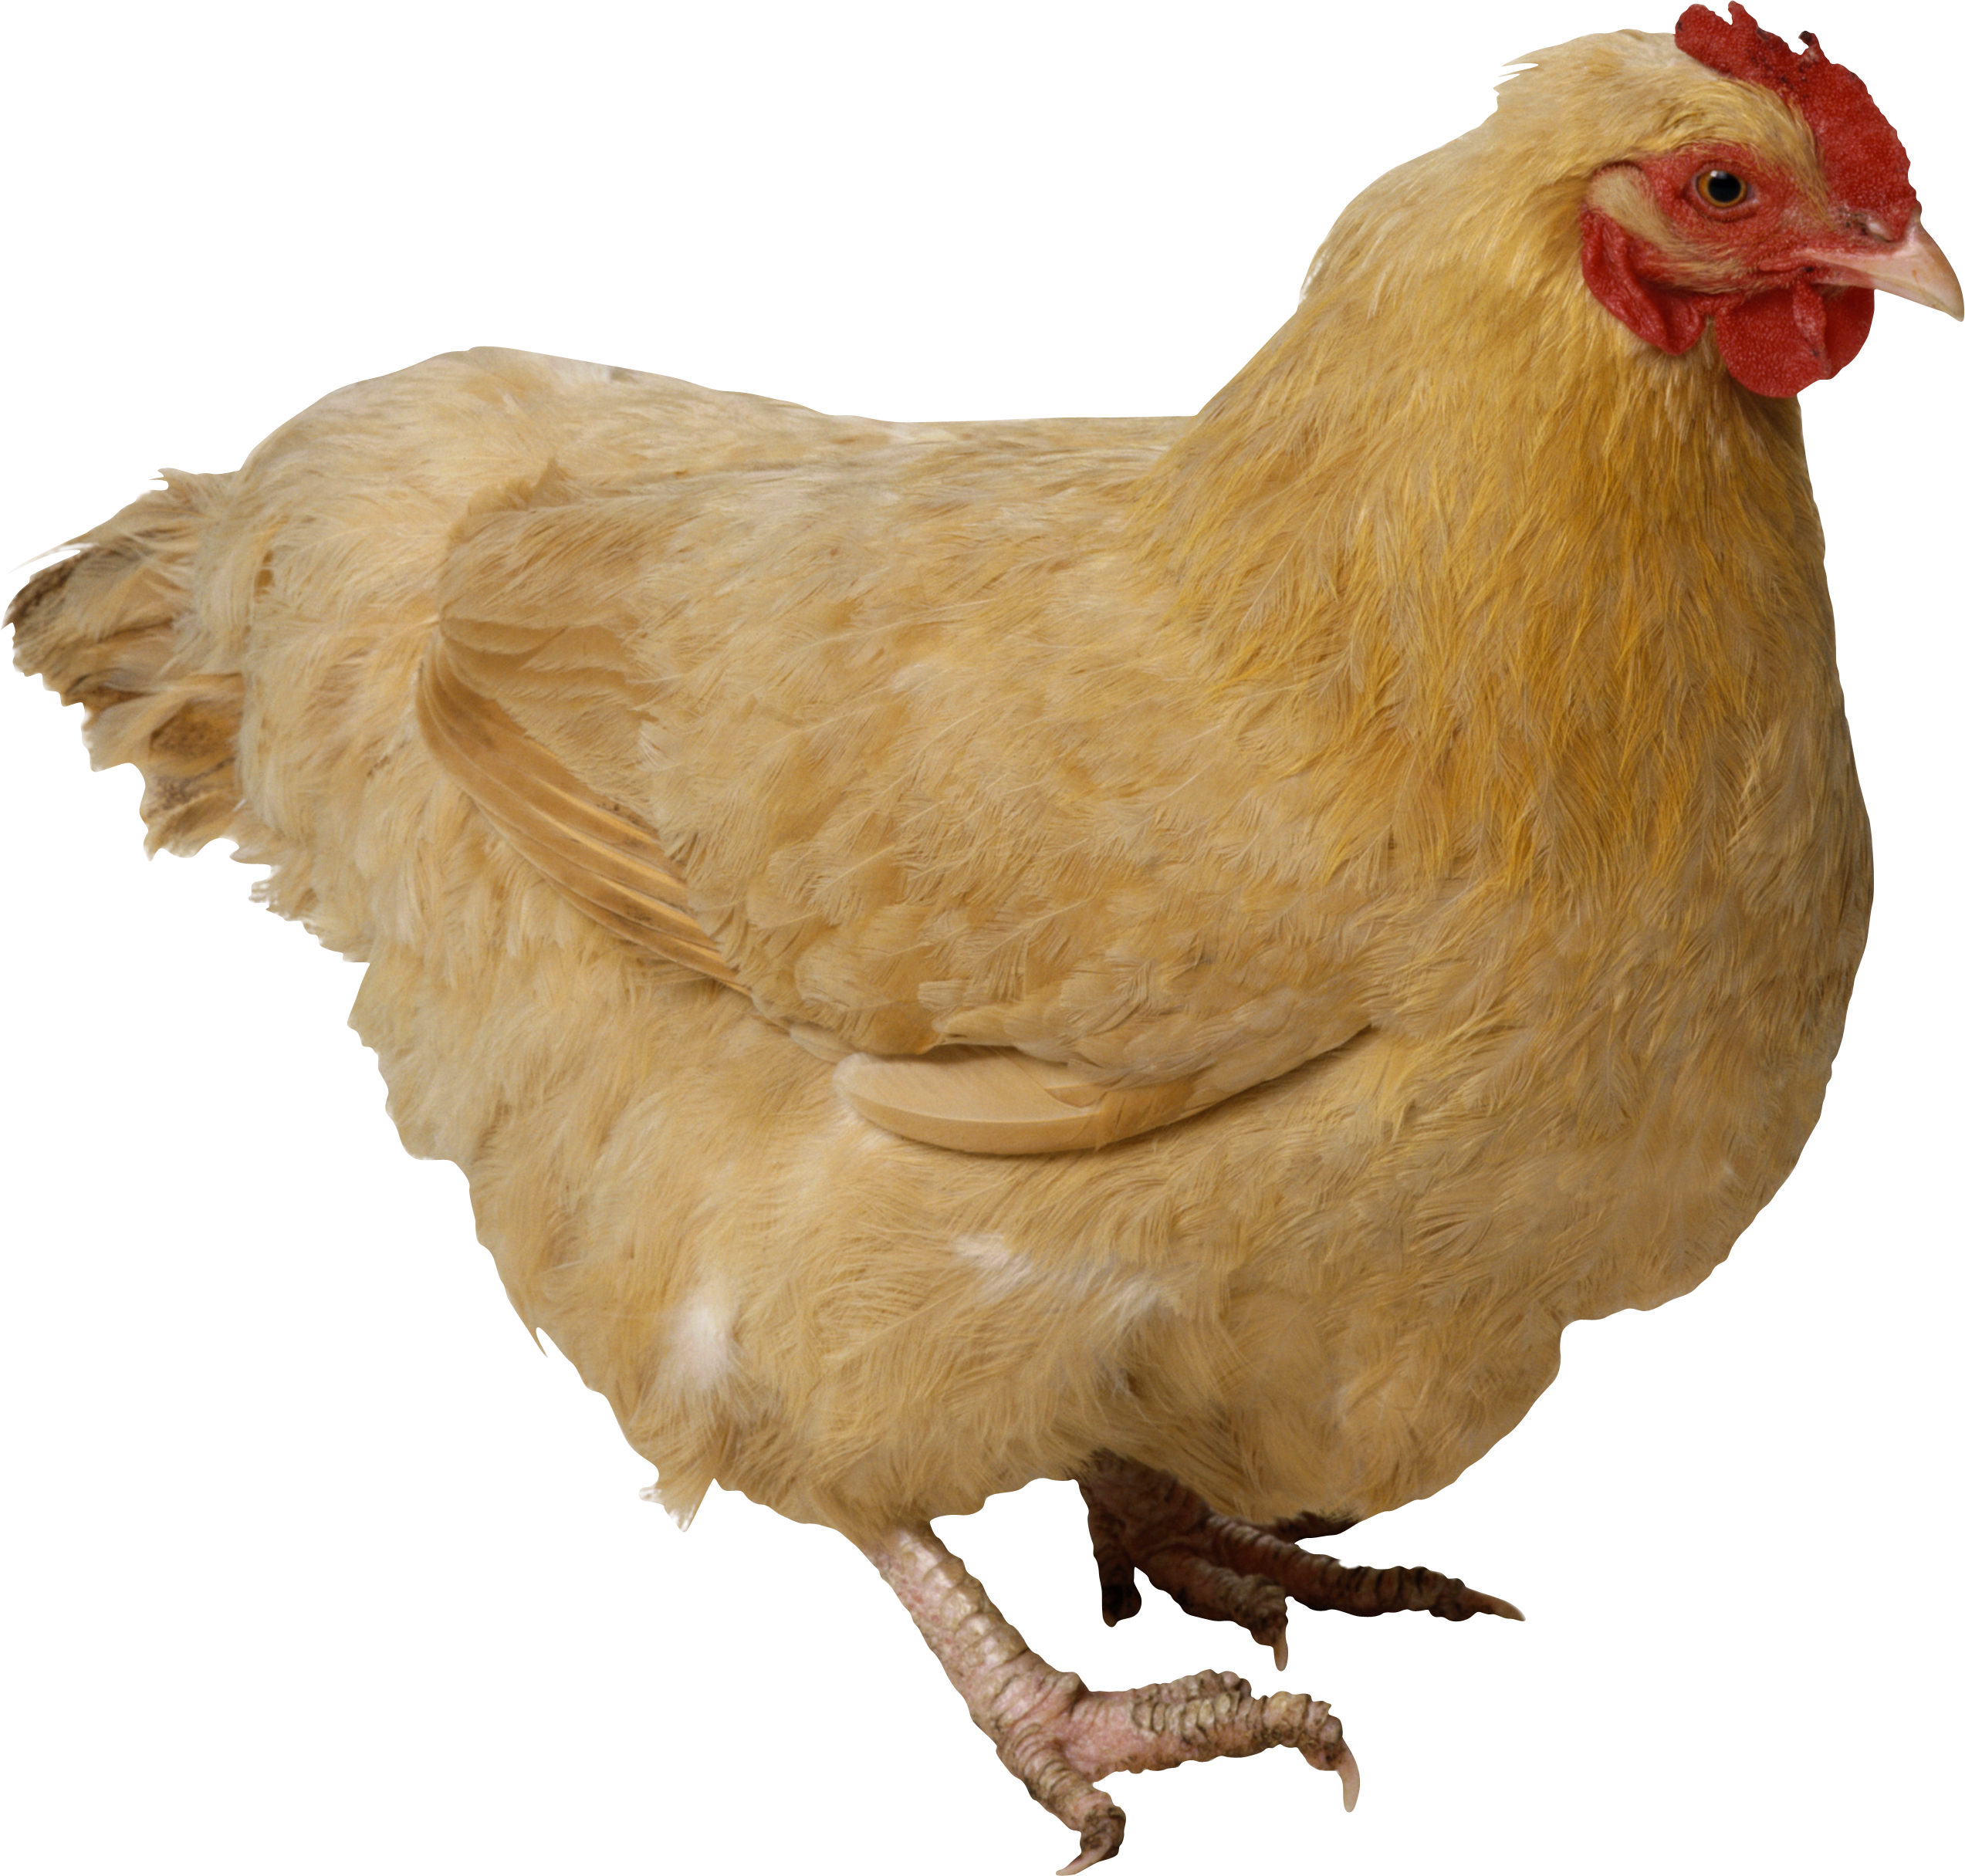 Collection of Chiken PNG HD. | PlusPNG